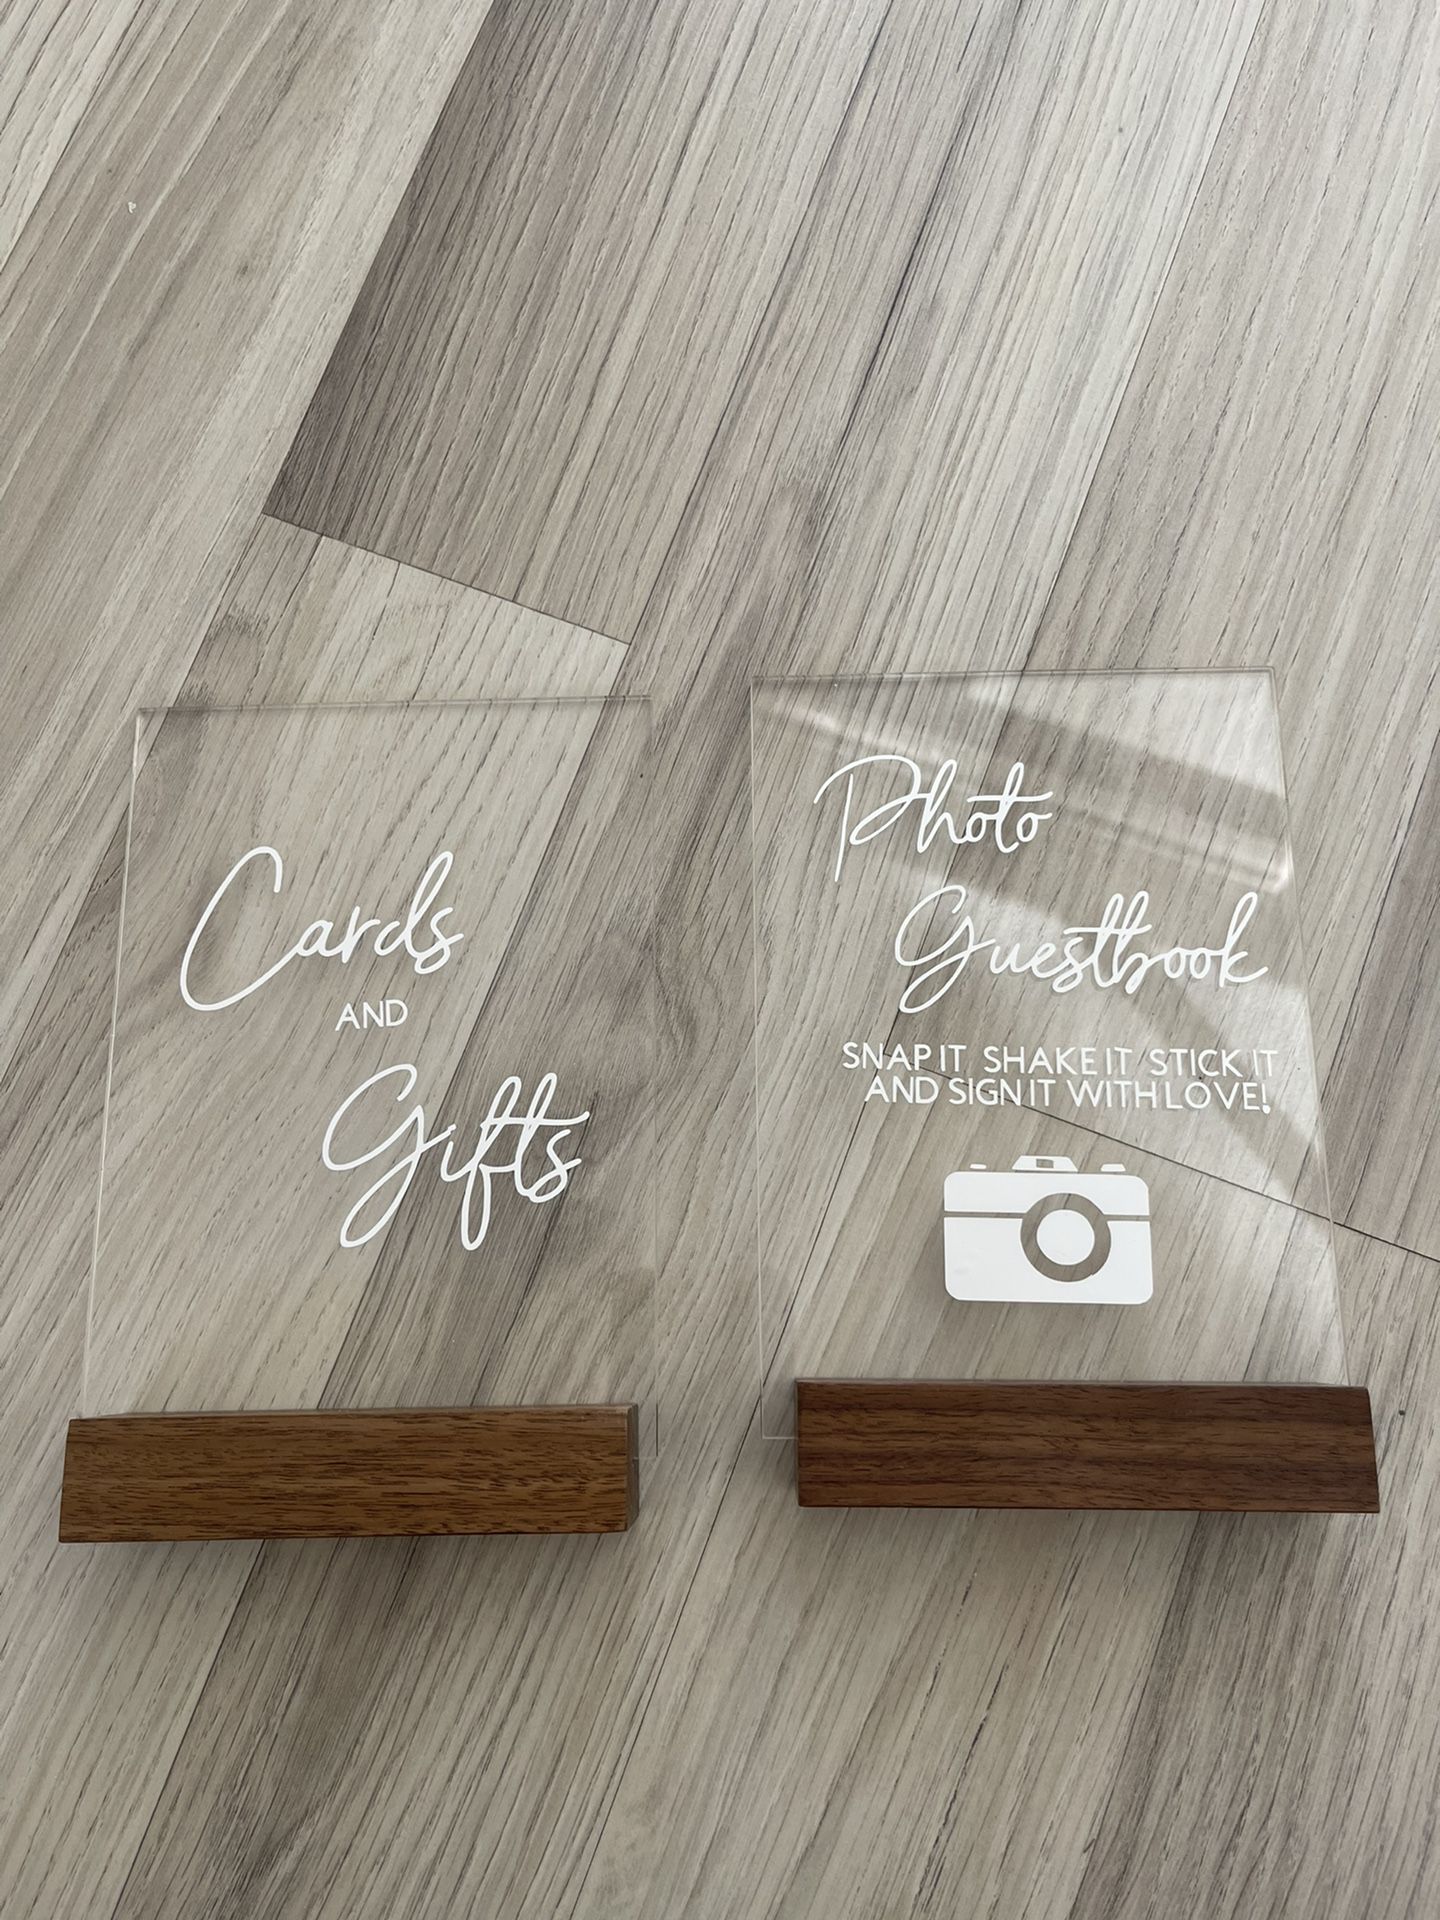 Photo Guest Book & Cards And Gifts Acrylic sign